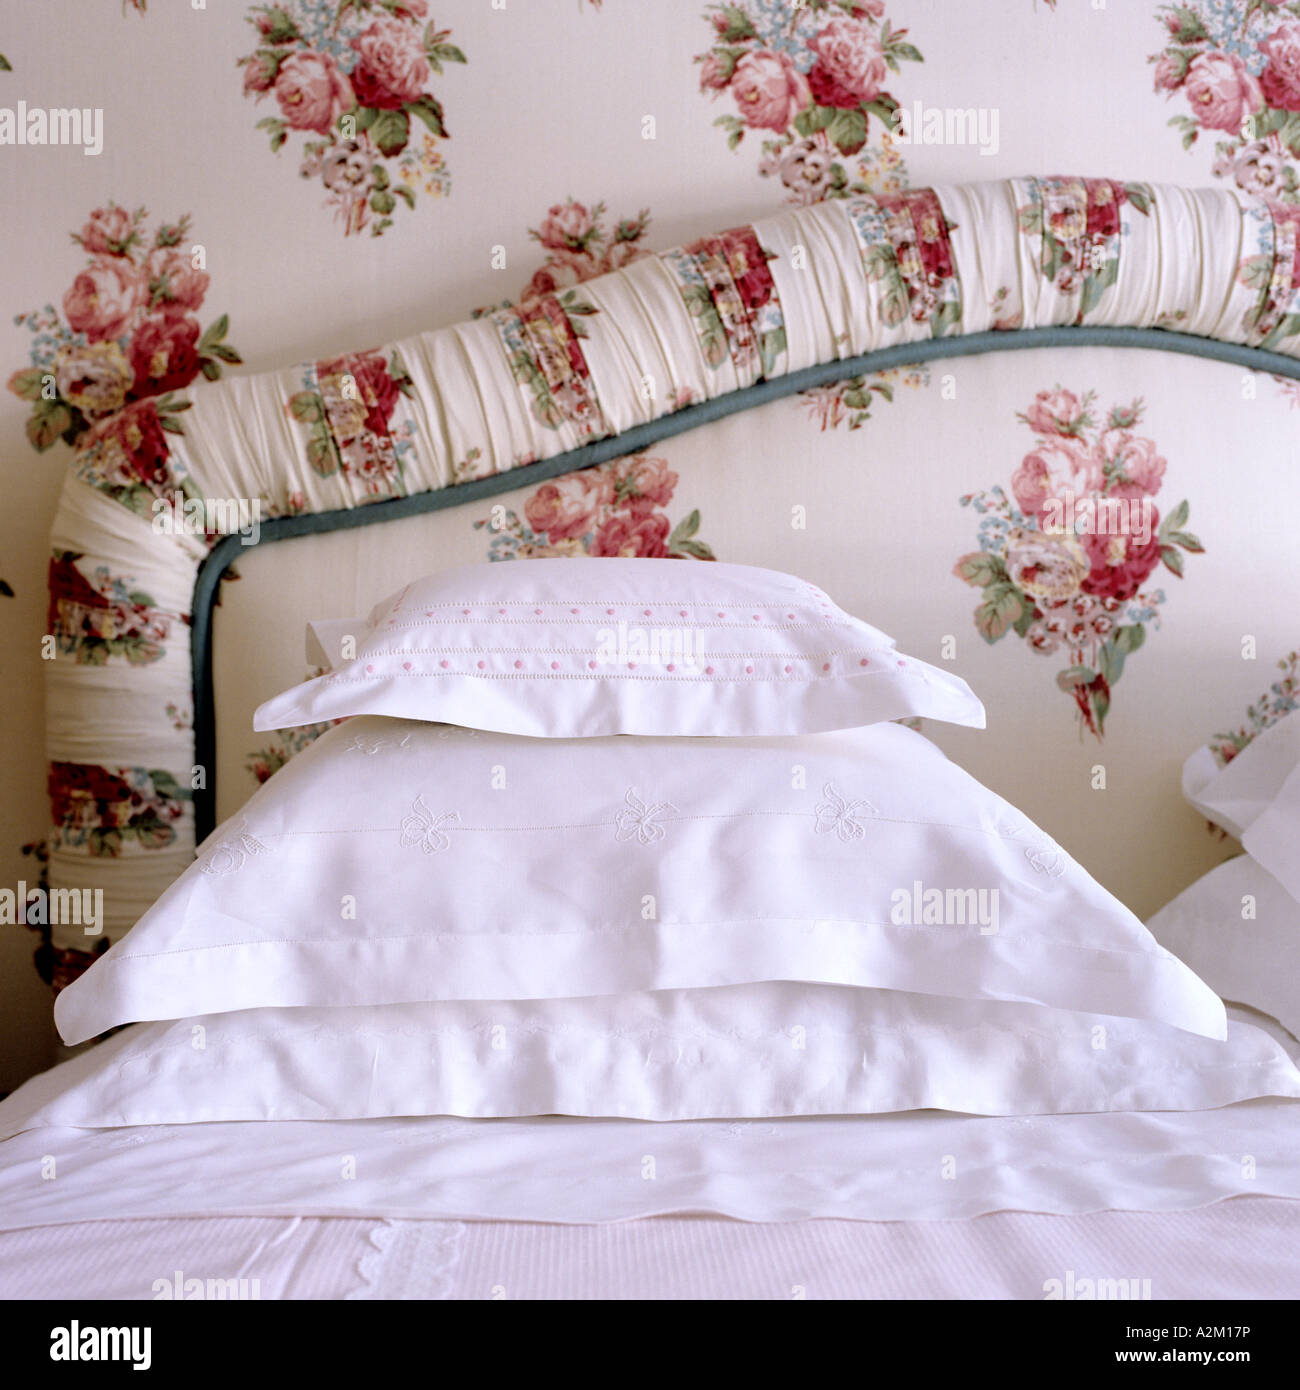 fabric-covered bed head and pillows in crisp white cotton slips Stock Photo